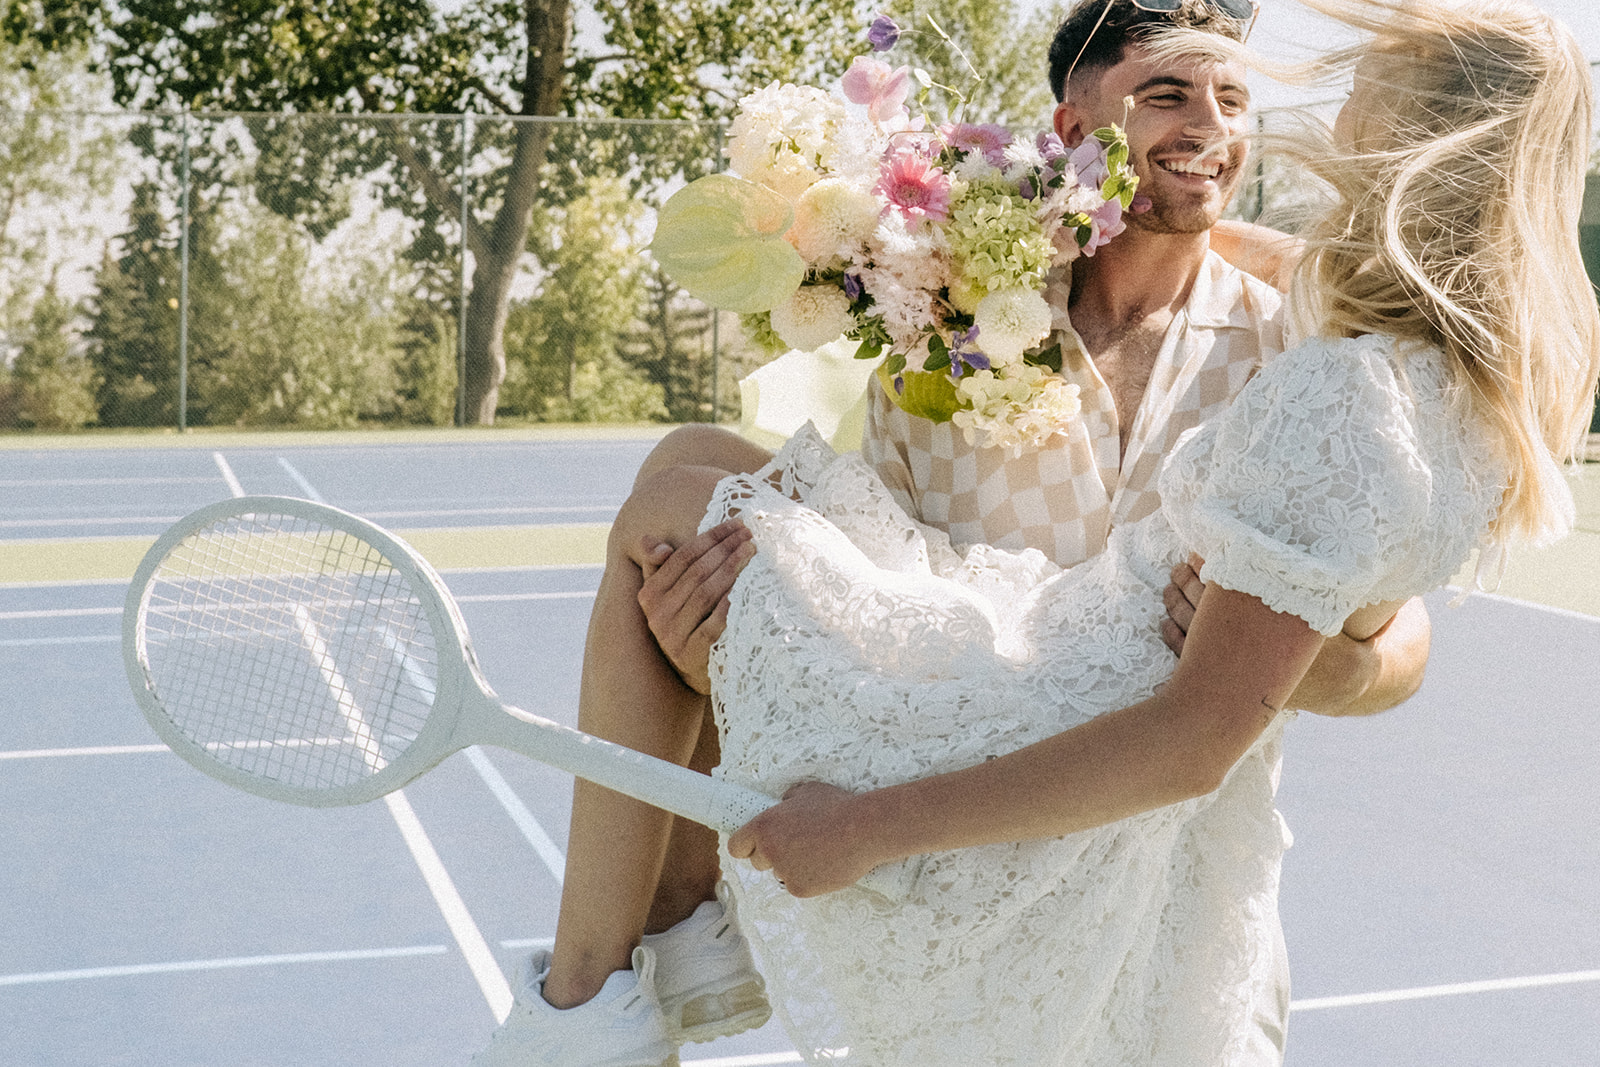 Modern runaway bride sporting short wedding dress for a unique wedding look, tennis-themed wedding ideas for a sporty bridal inspiration, pink and chartreuse bouquet ideas